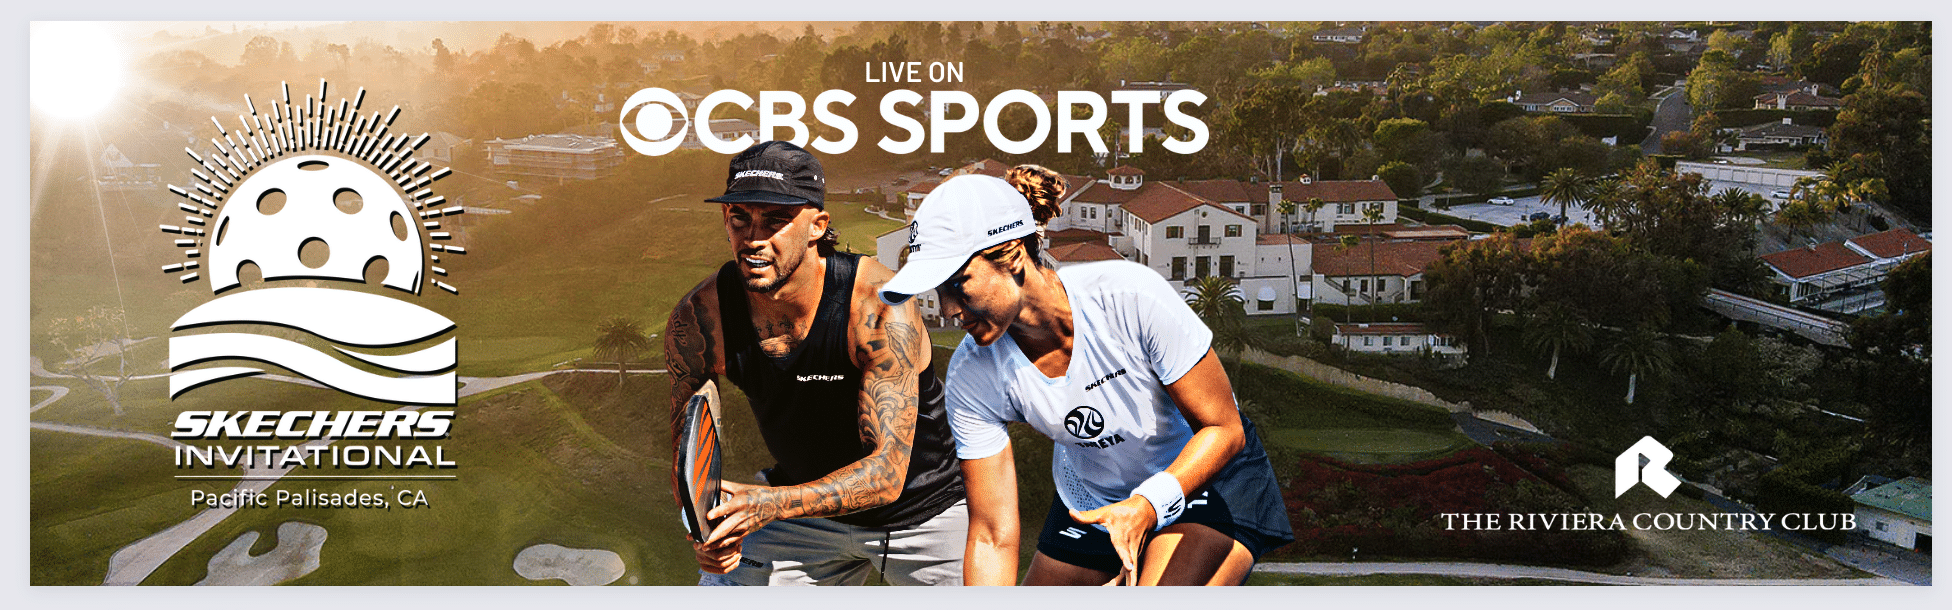 CBS Sports will Broadcast Pro Pickleball with the PPA Tour Skechers Invitational Summer Championships PPA Tour